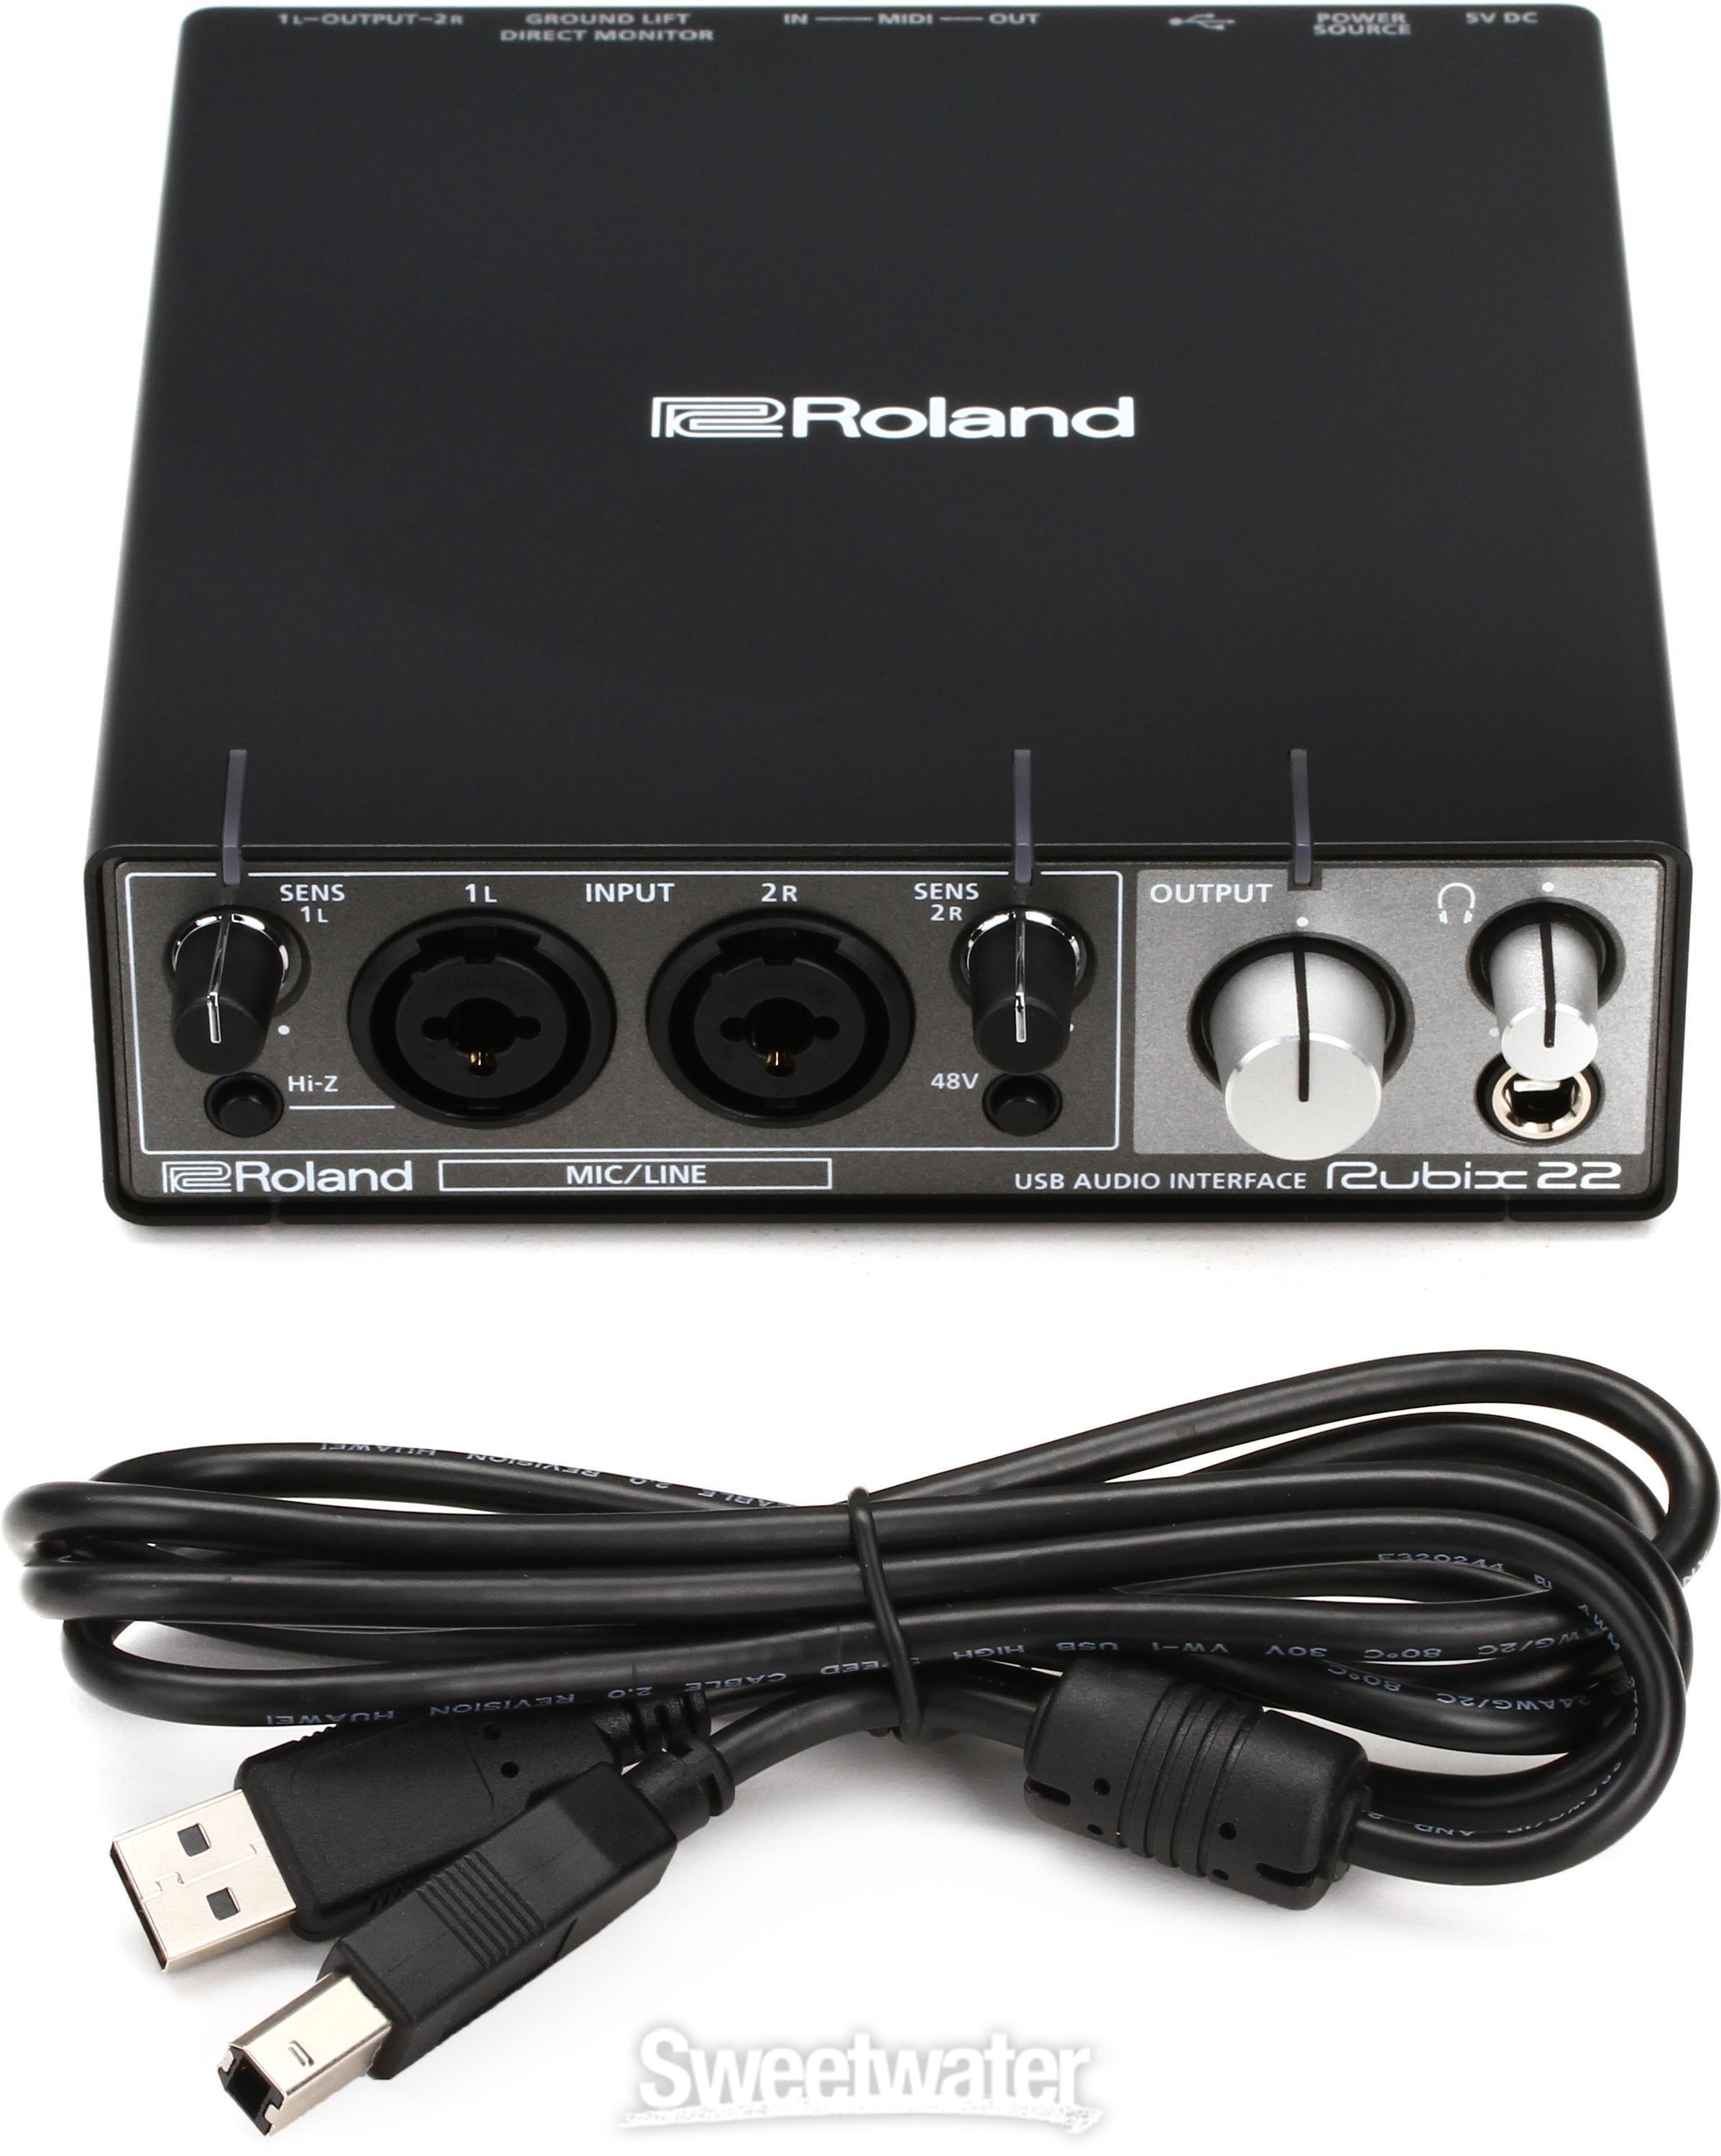 Roland Rubix 22 USB Audio Interface Reviews | Sweetwater